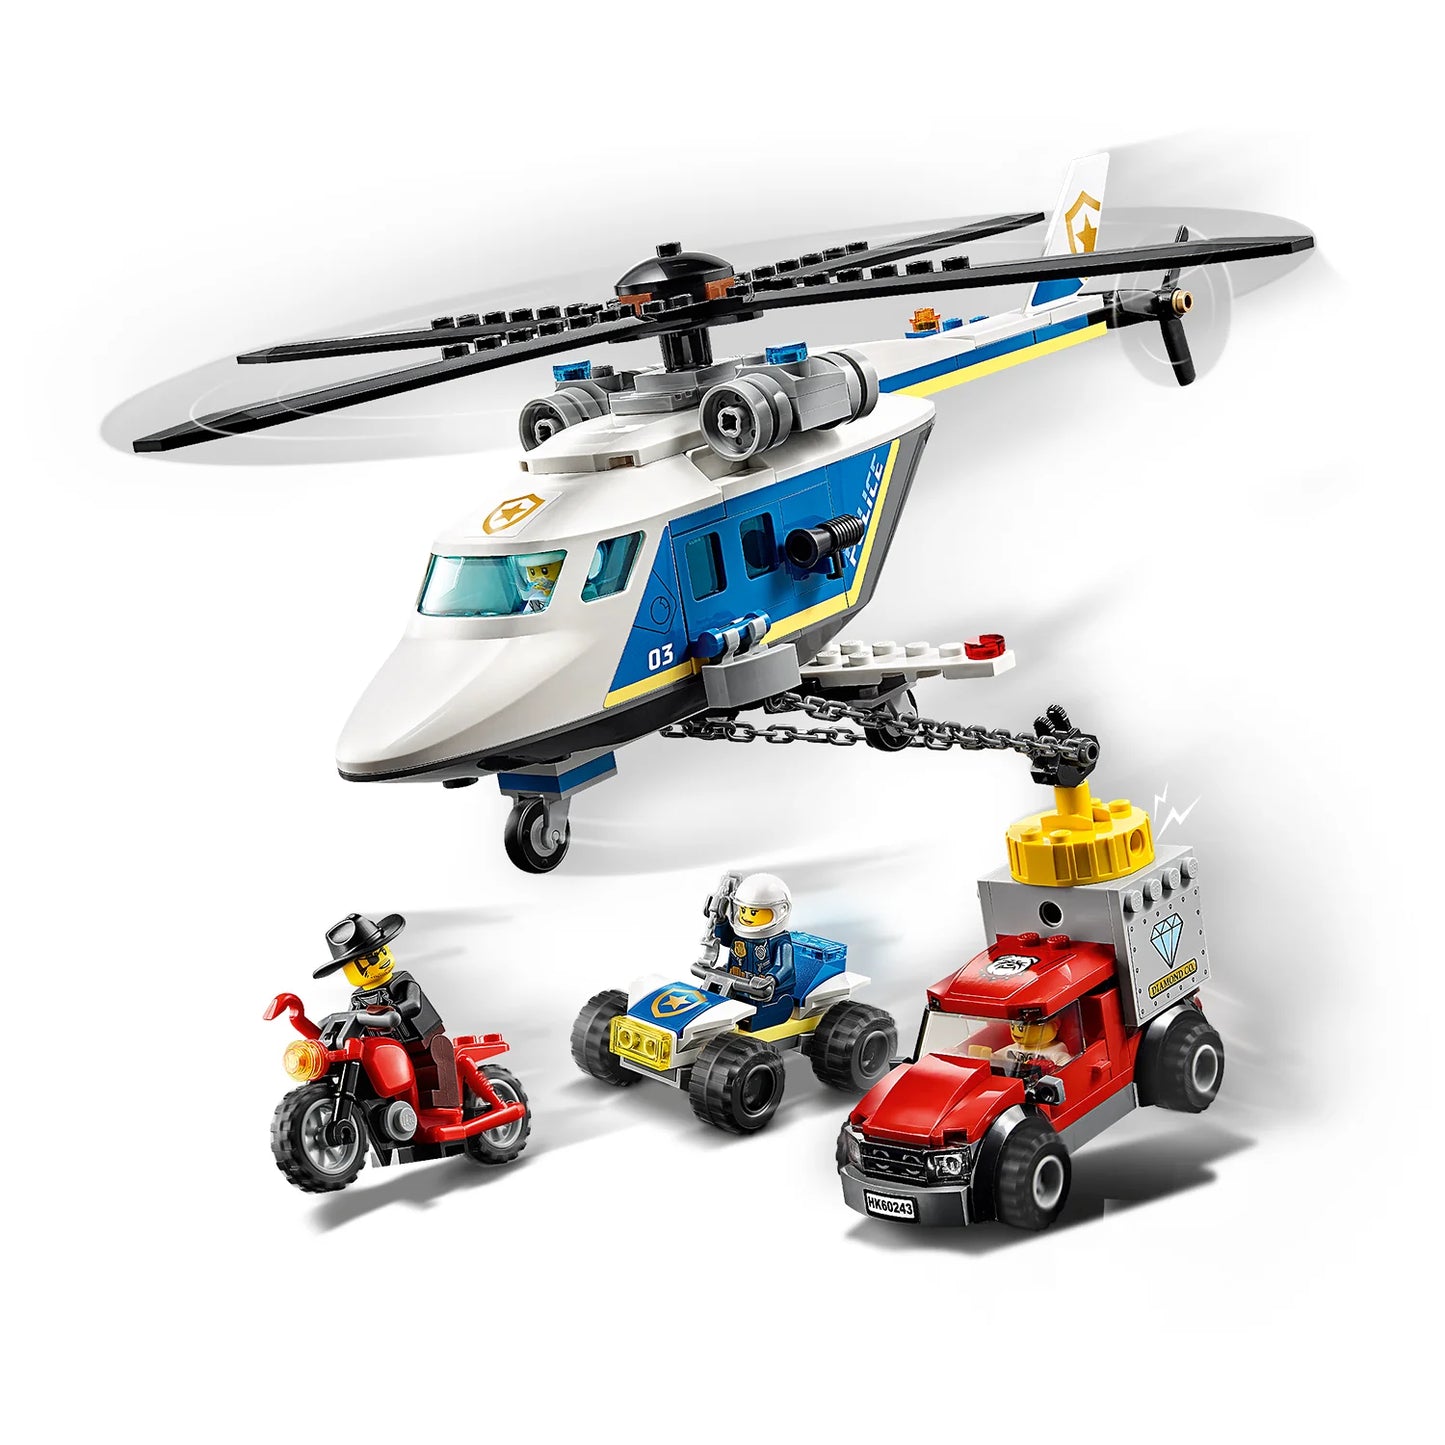 Police Helicopter Chase - LEGO City